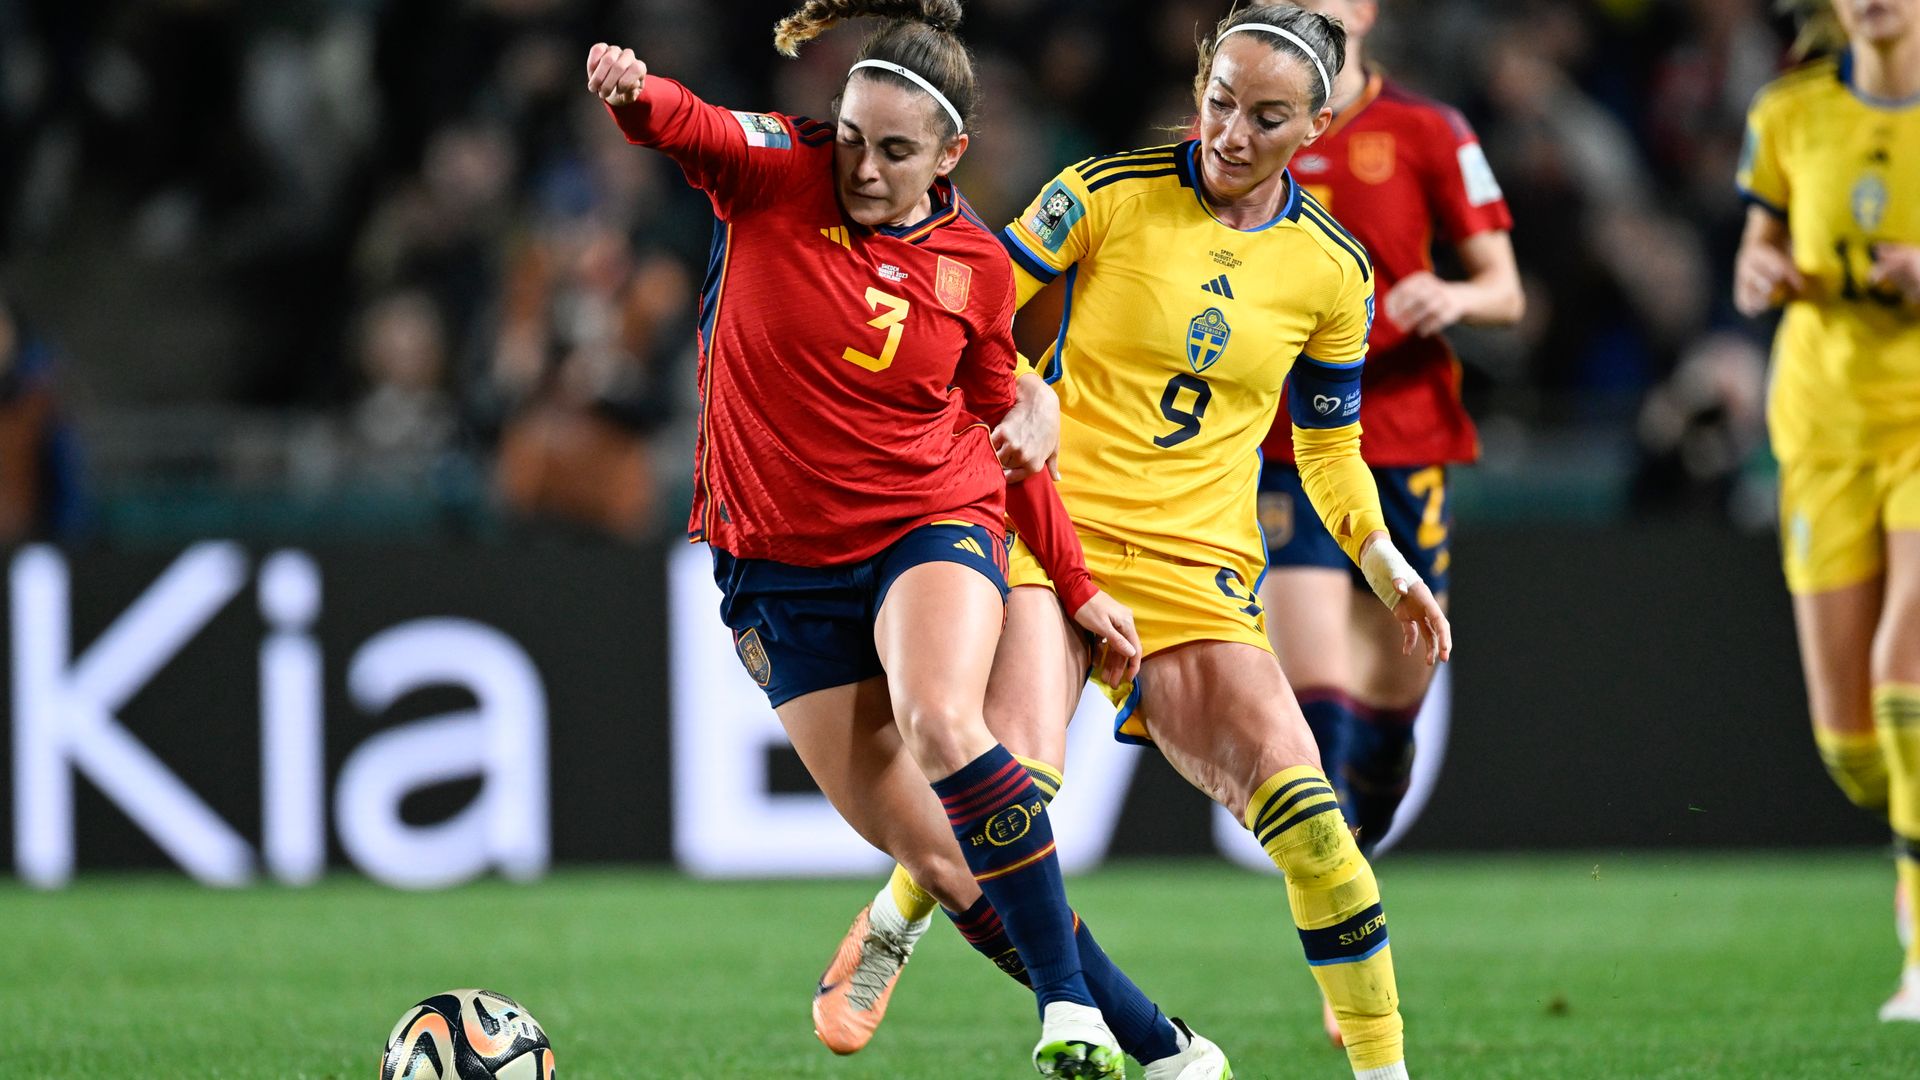 Spain on top, but Sweden go closest in goalless first half LIVE!